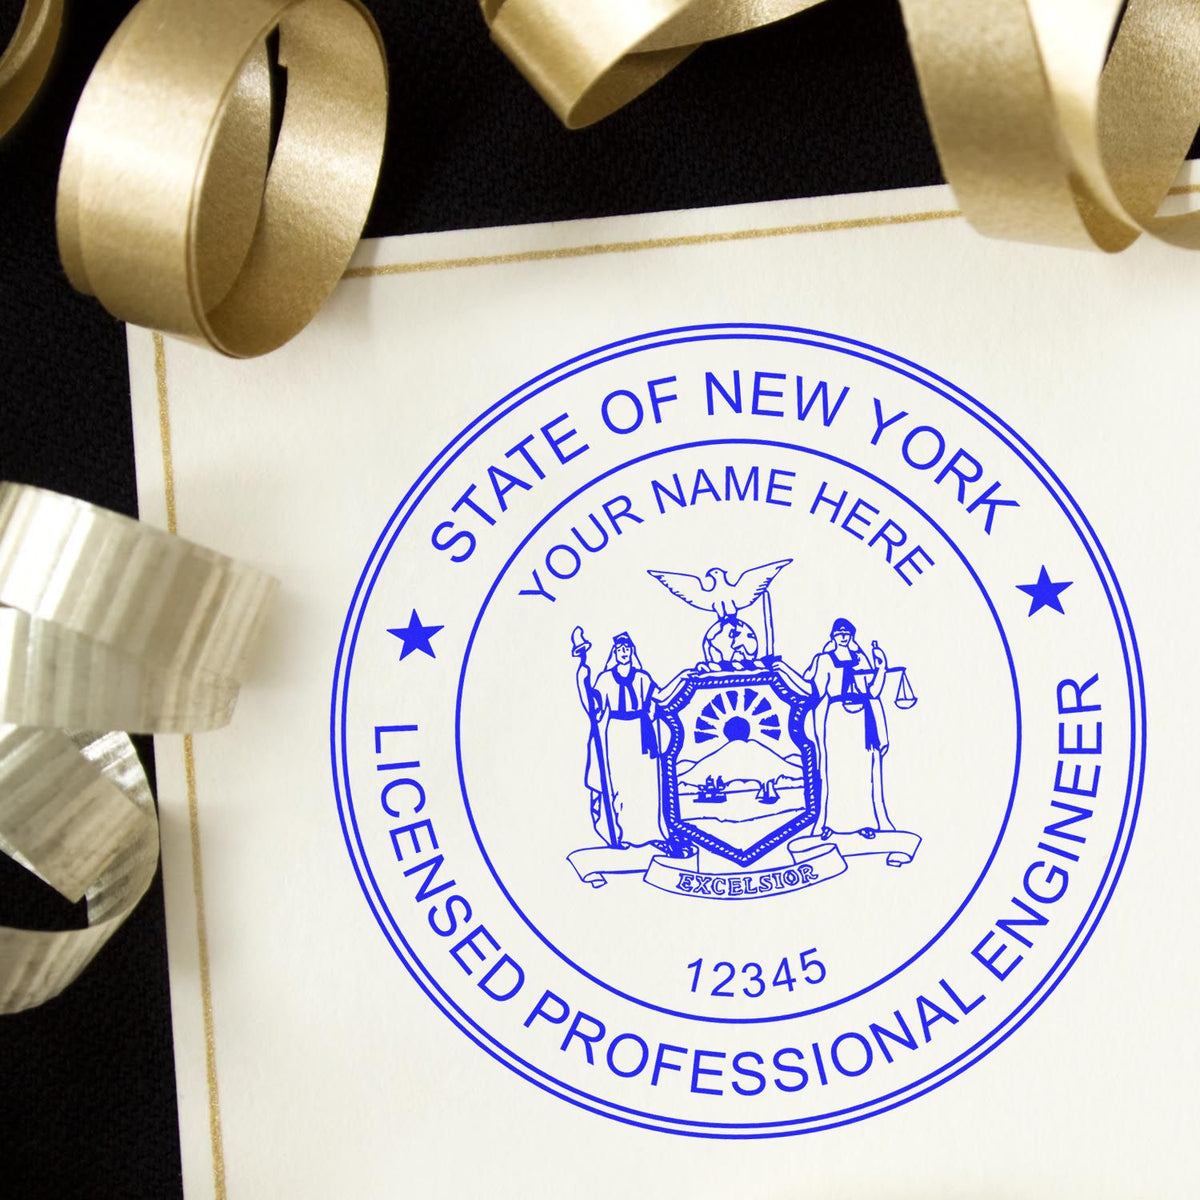 The Digital New York PE Stamp and Electronic Seal for New York Engineer stamp impression comes to life with a crisp, detailed photo on paper - showcasing true professional quality.